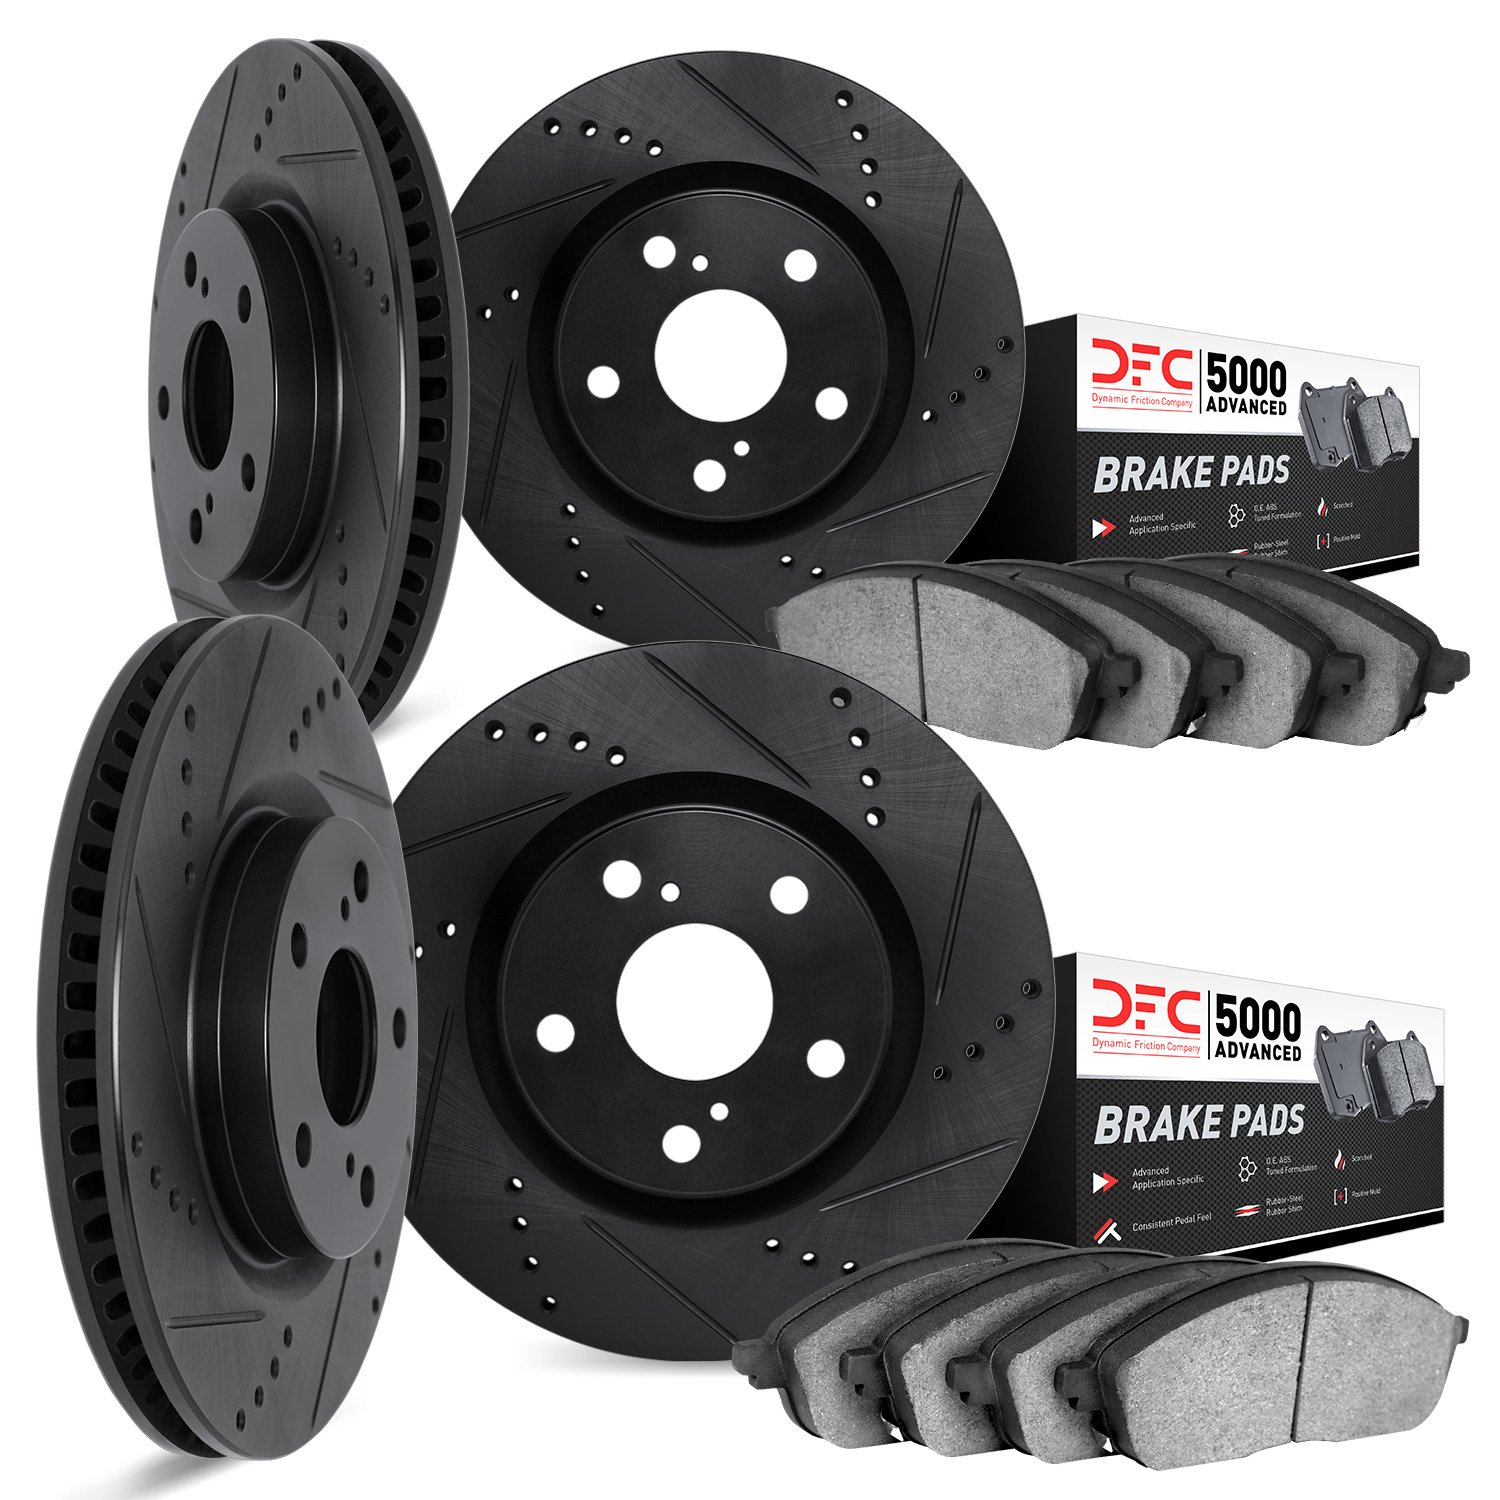 8504-27036 Drilled/Slotted Brake Rotors w/5000 Advanced Brake Pads Kit [Black], 2016-2020 Volvo, Position: Front and Rear